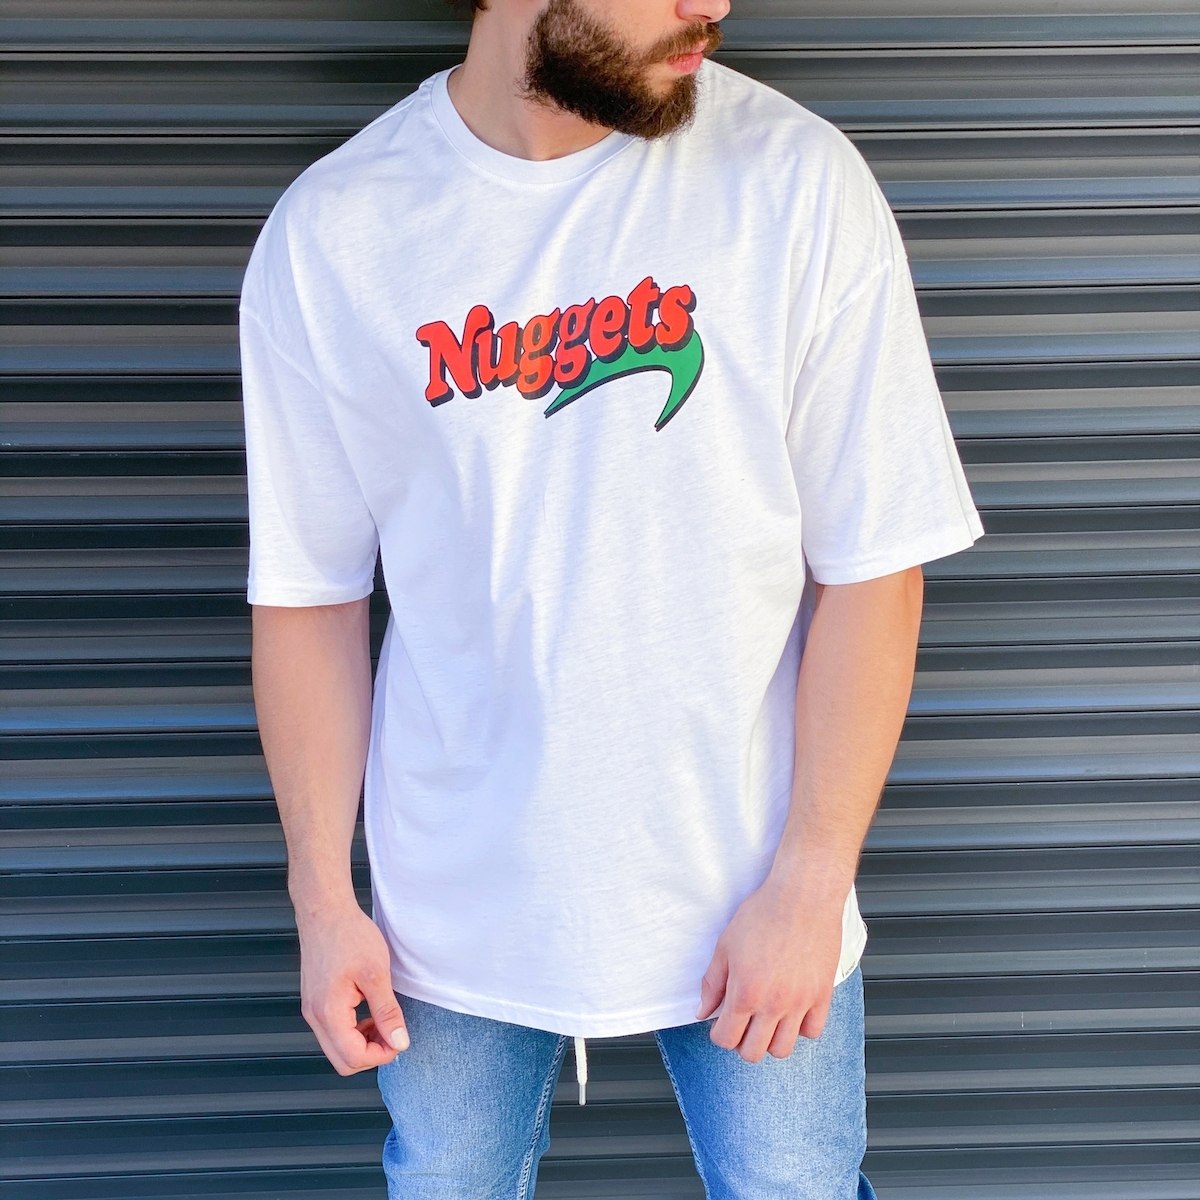 Men's "Nuggets" Oversize T-Shirt In White - 2